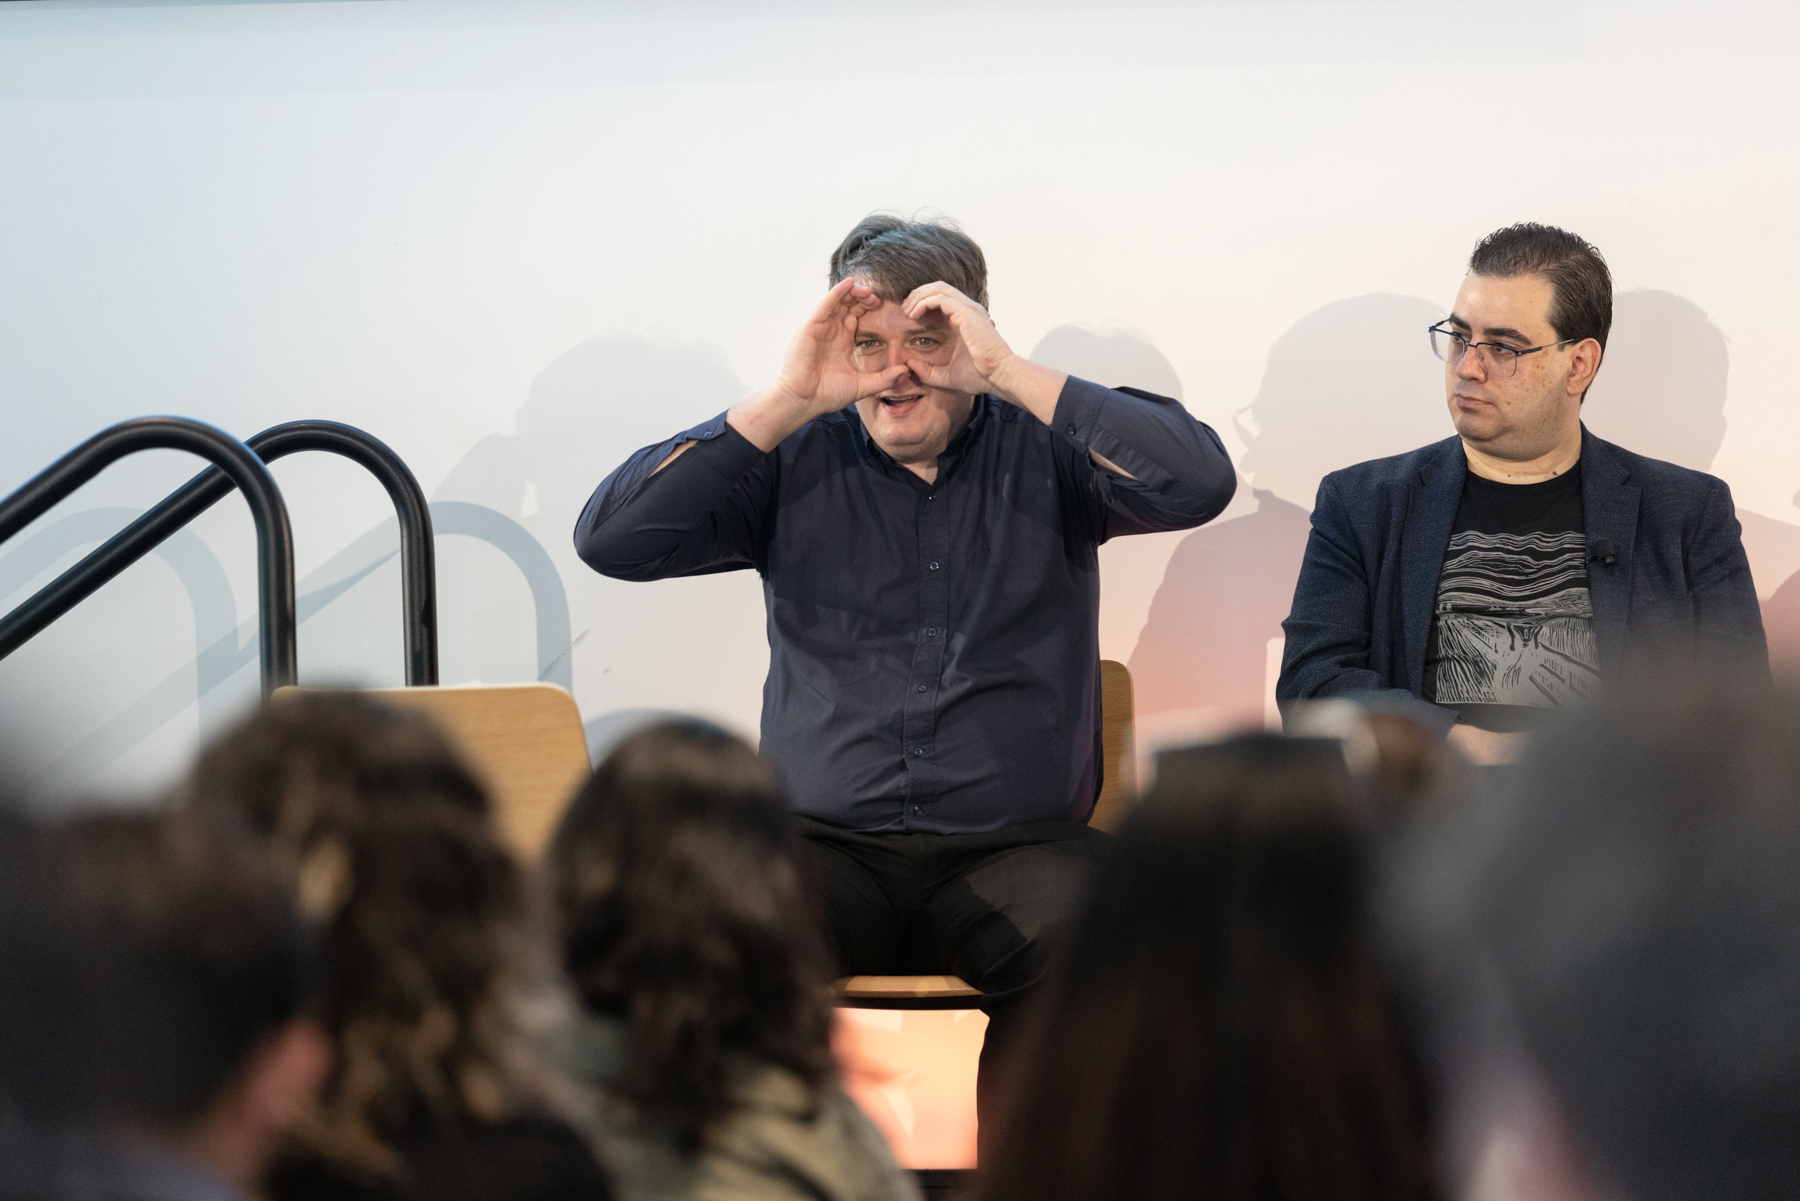 Christian Vogler on Workplace panel holds hands up to his eyes representing a VR headset